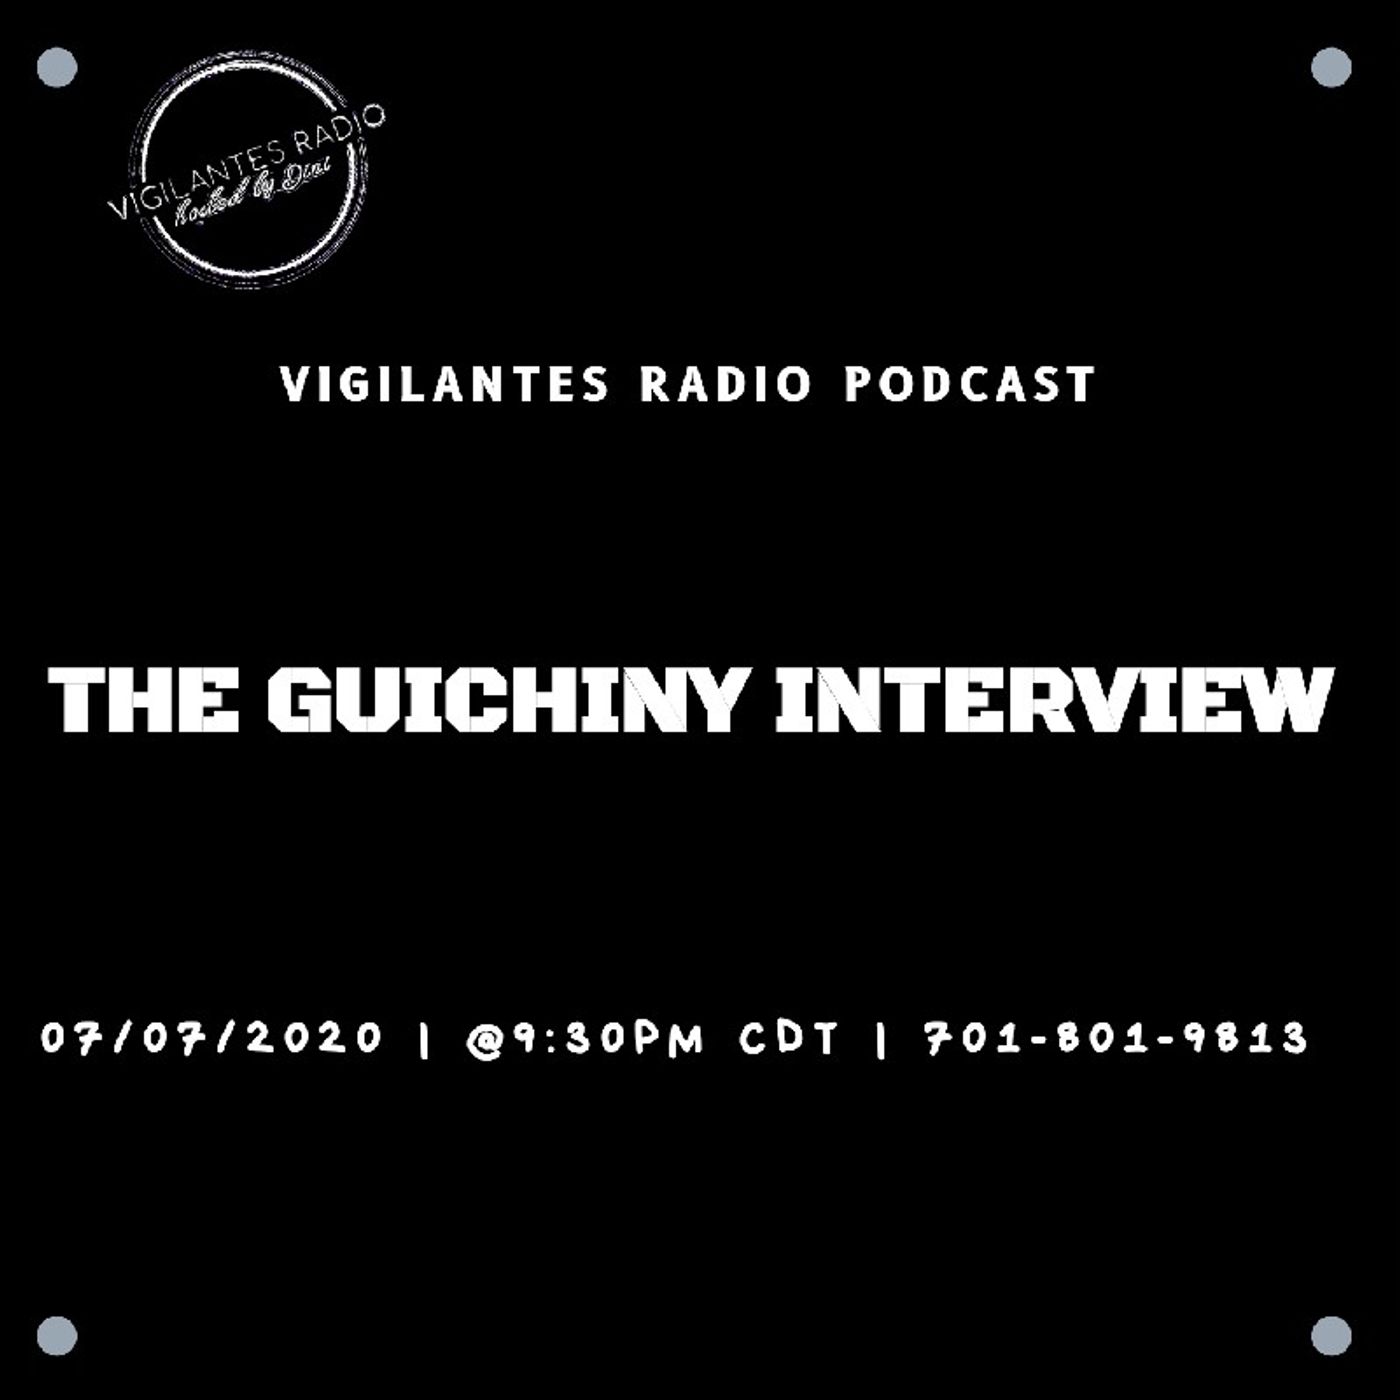 The Guichiny Interview. Image